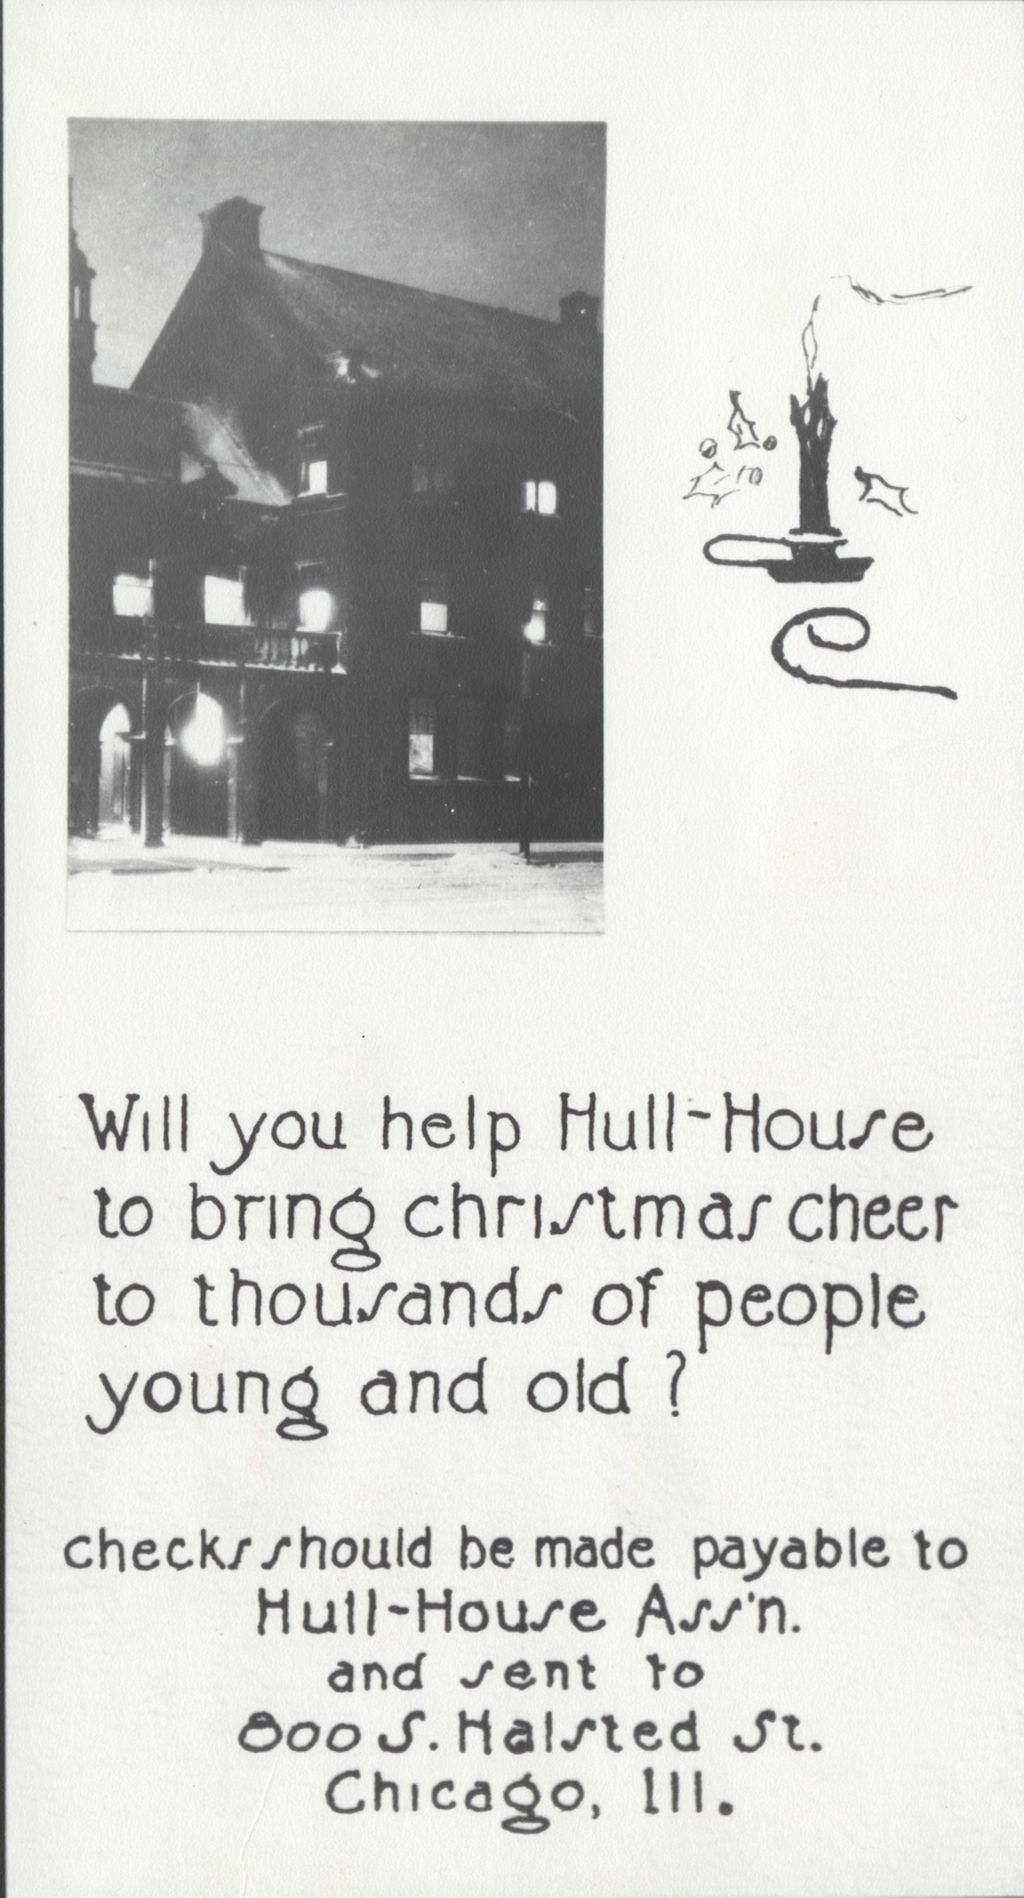 Miniature of Hull-House Christmas fundraising appeal